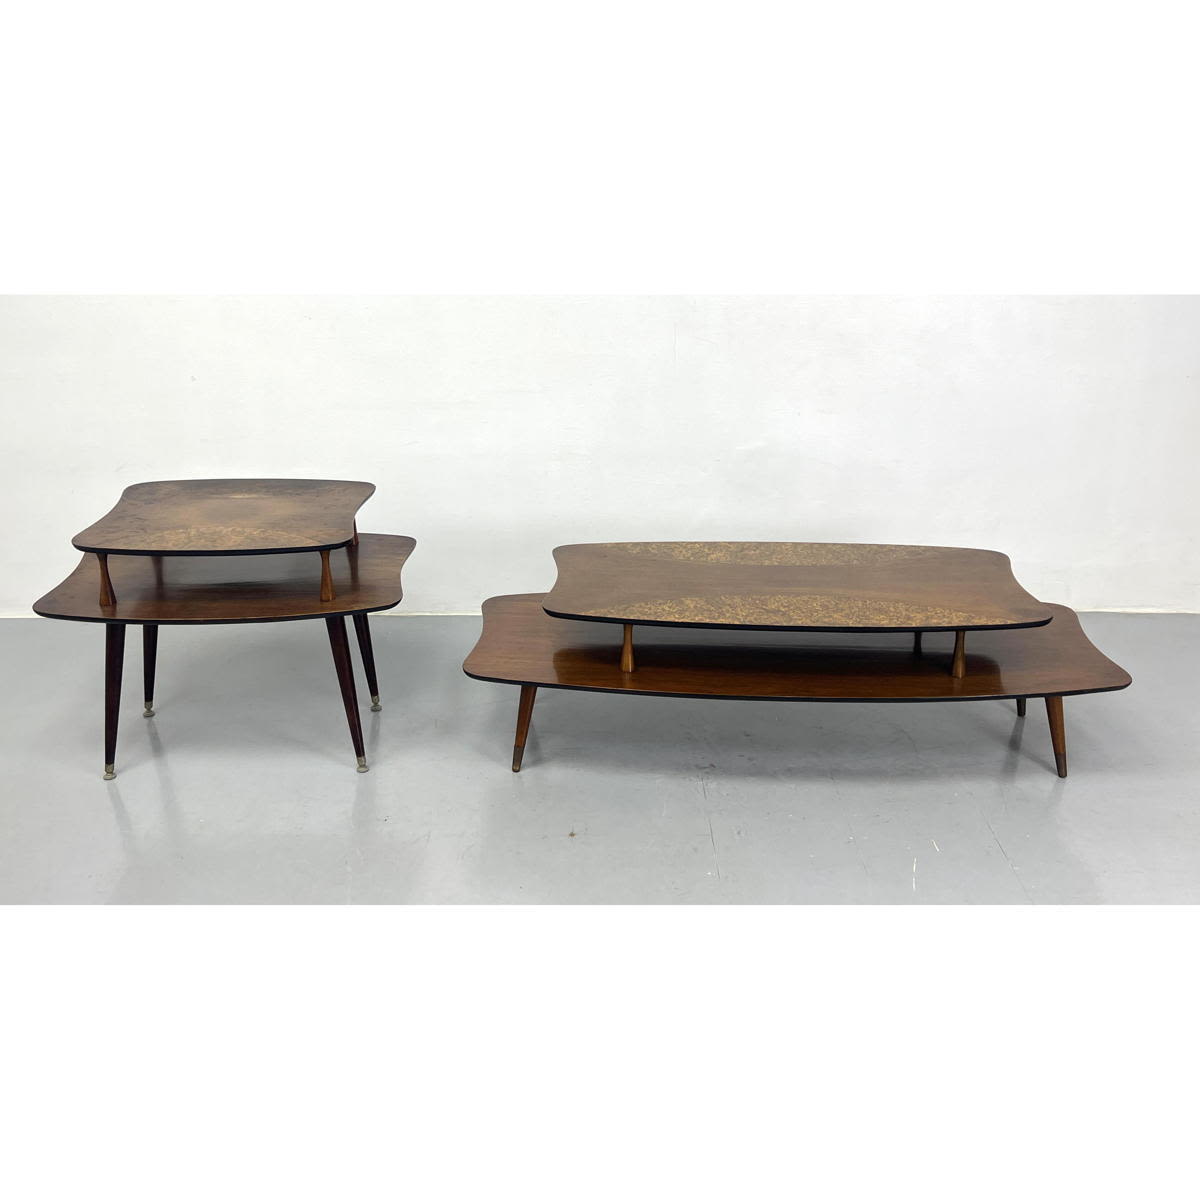 2pcs American Modern Tables. Decorated